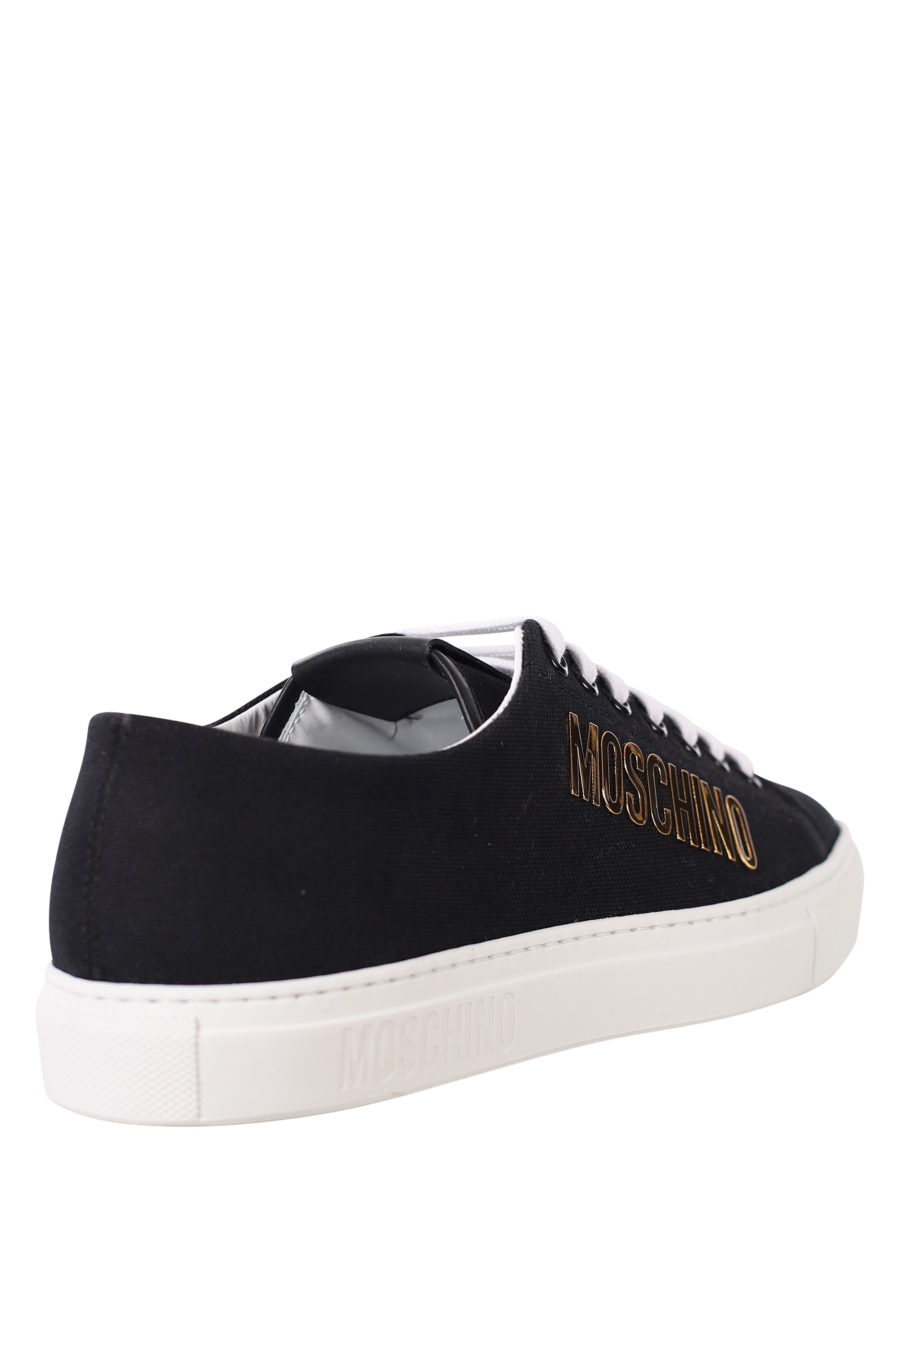 Black trainers with white sole and gold logo - IMG 0371